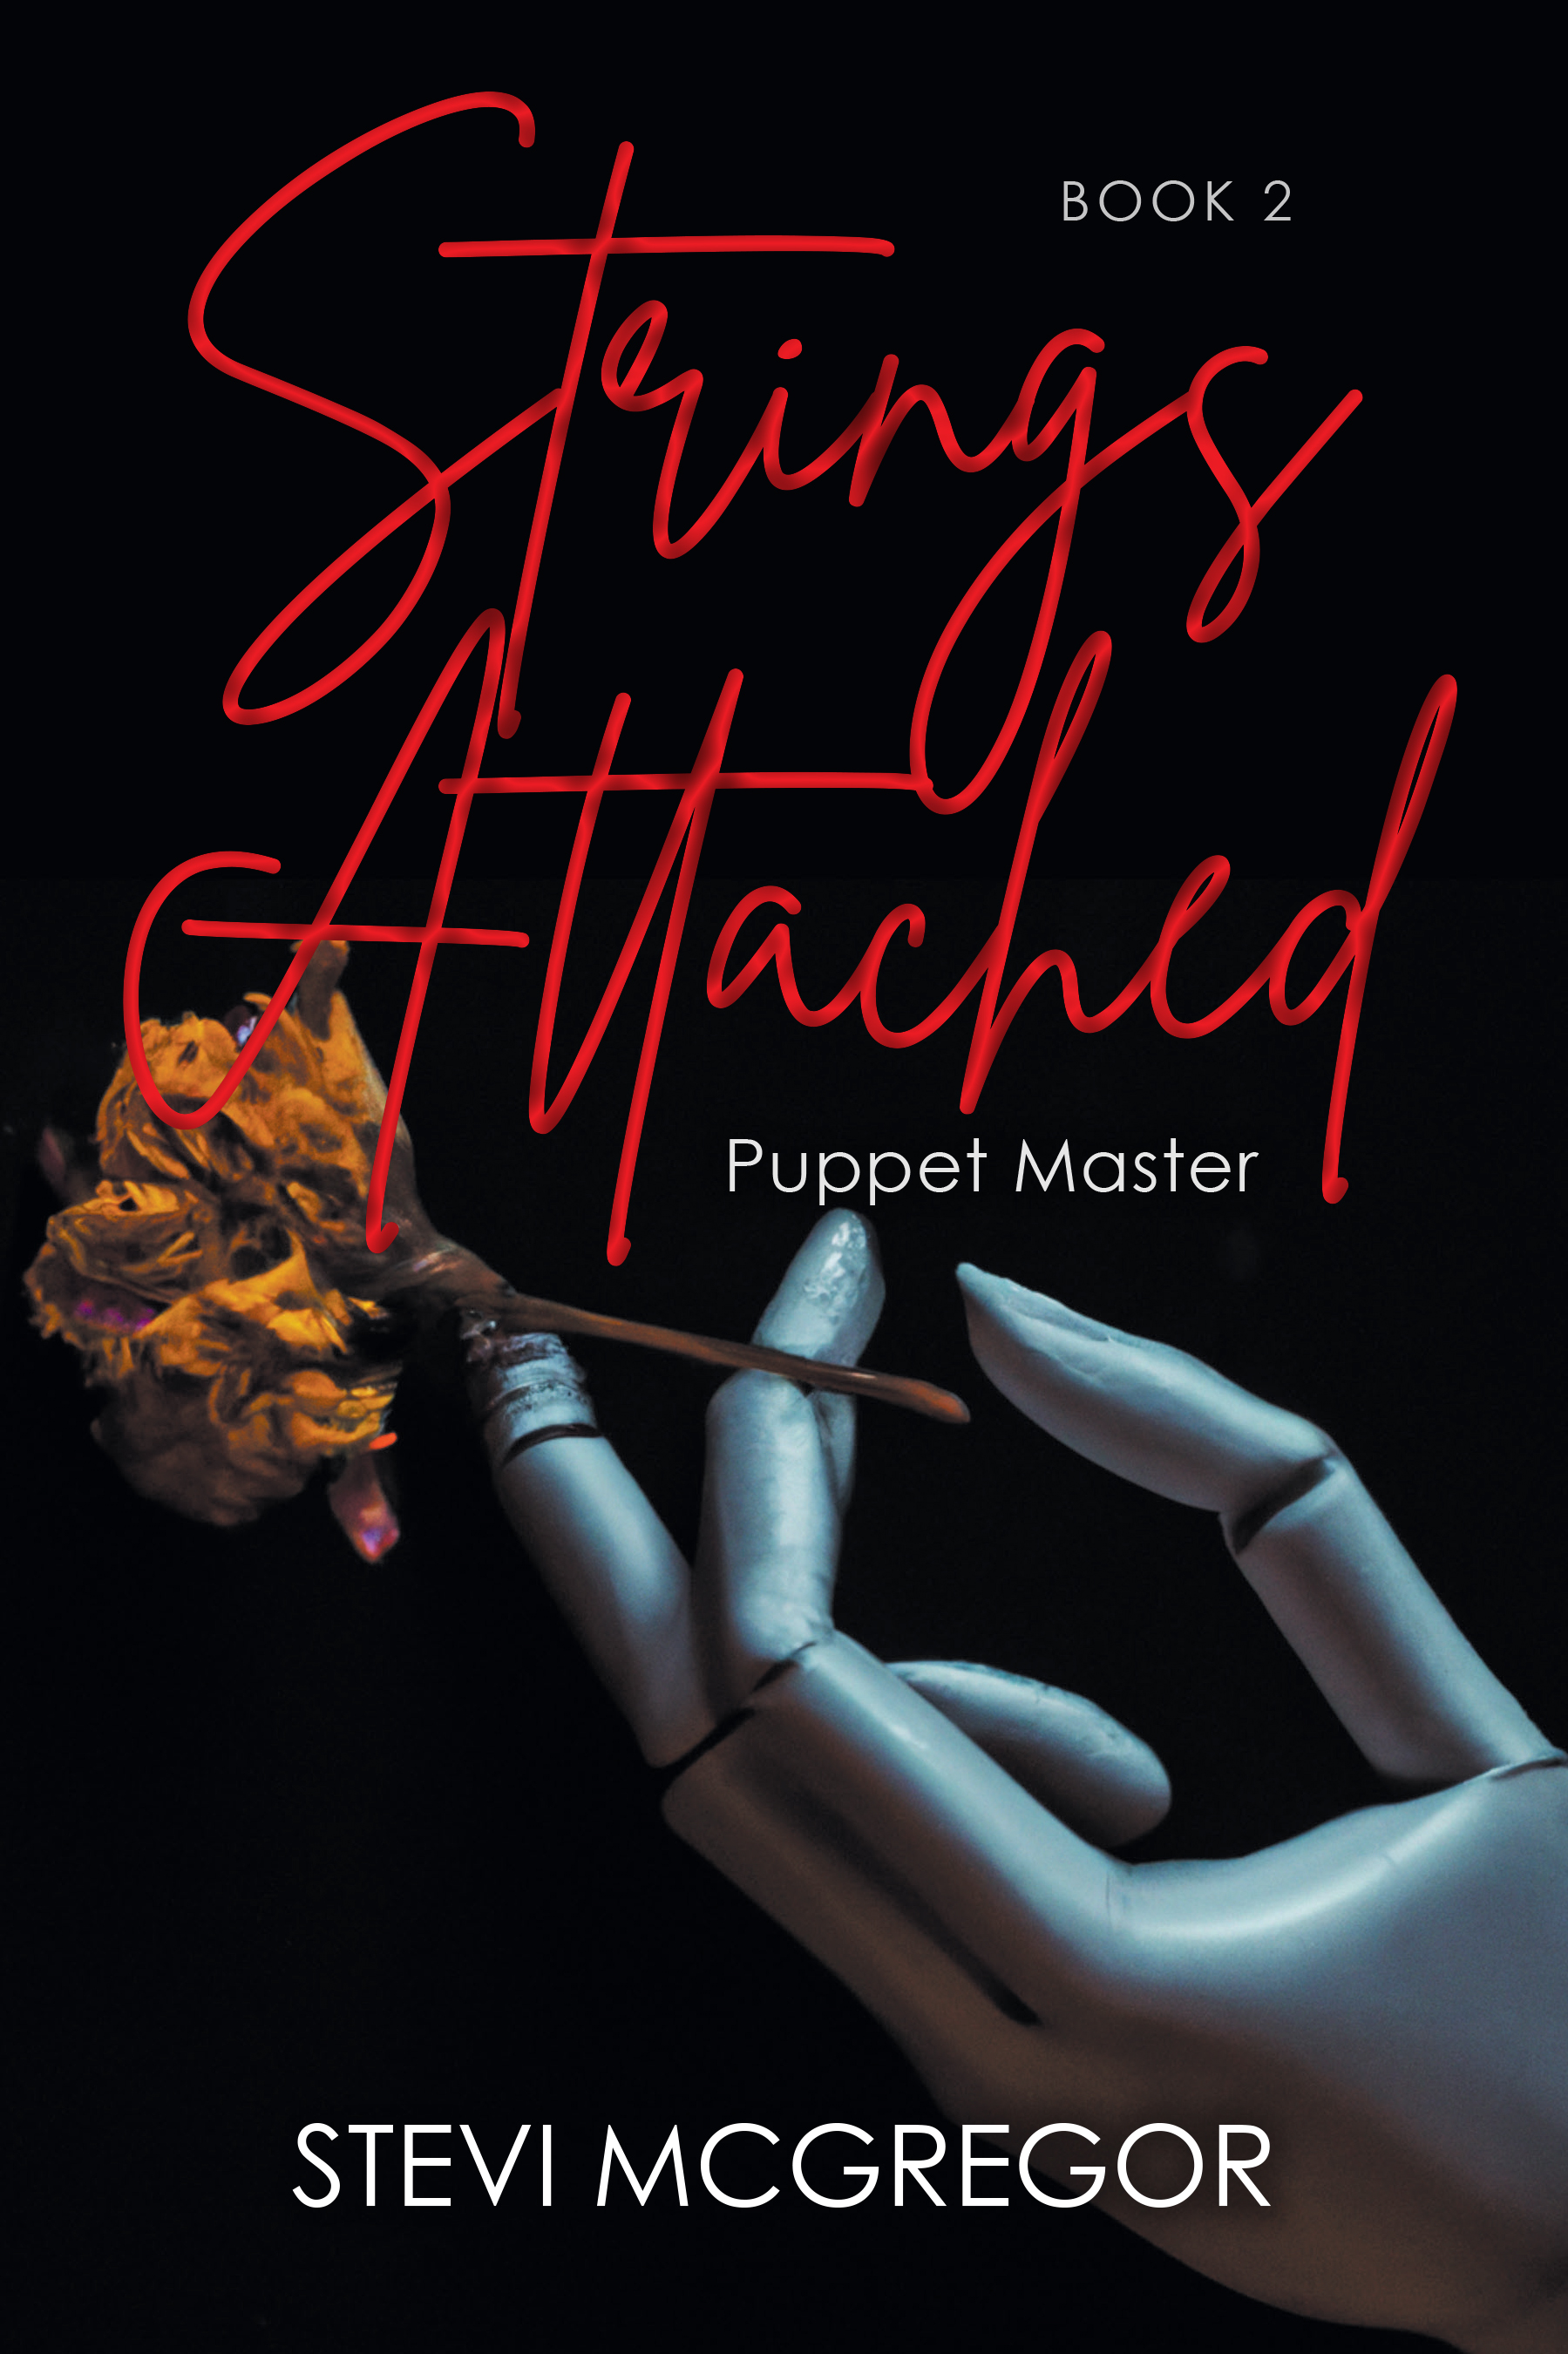 Author Stevi McGregor’s New Book, "Strings Attached: Puppet Master: Book 2," Follows a Group of Characters Who Must Navigate the Fallout After a Murder is Committed